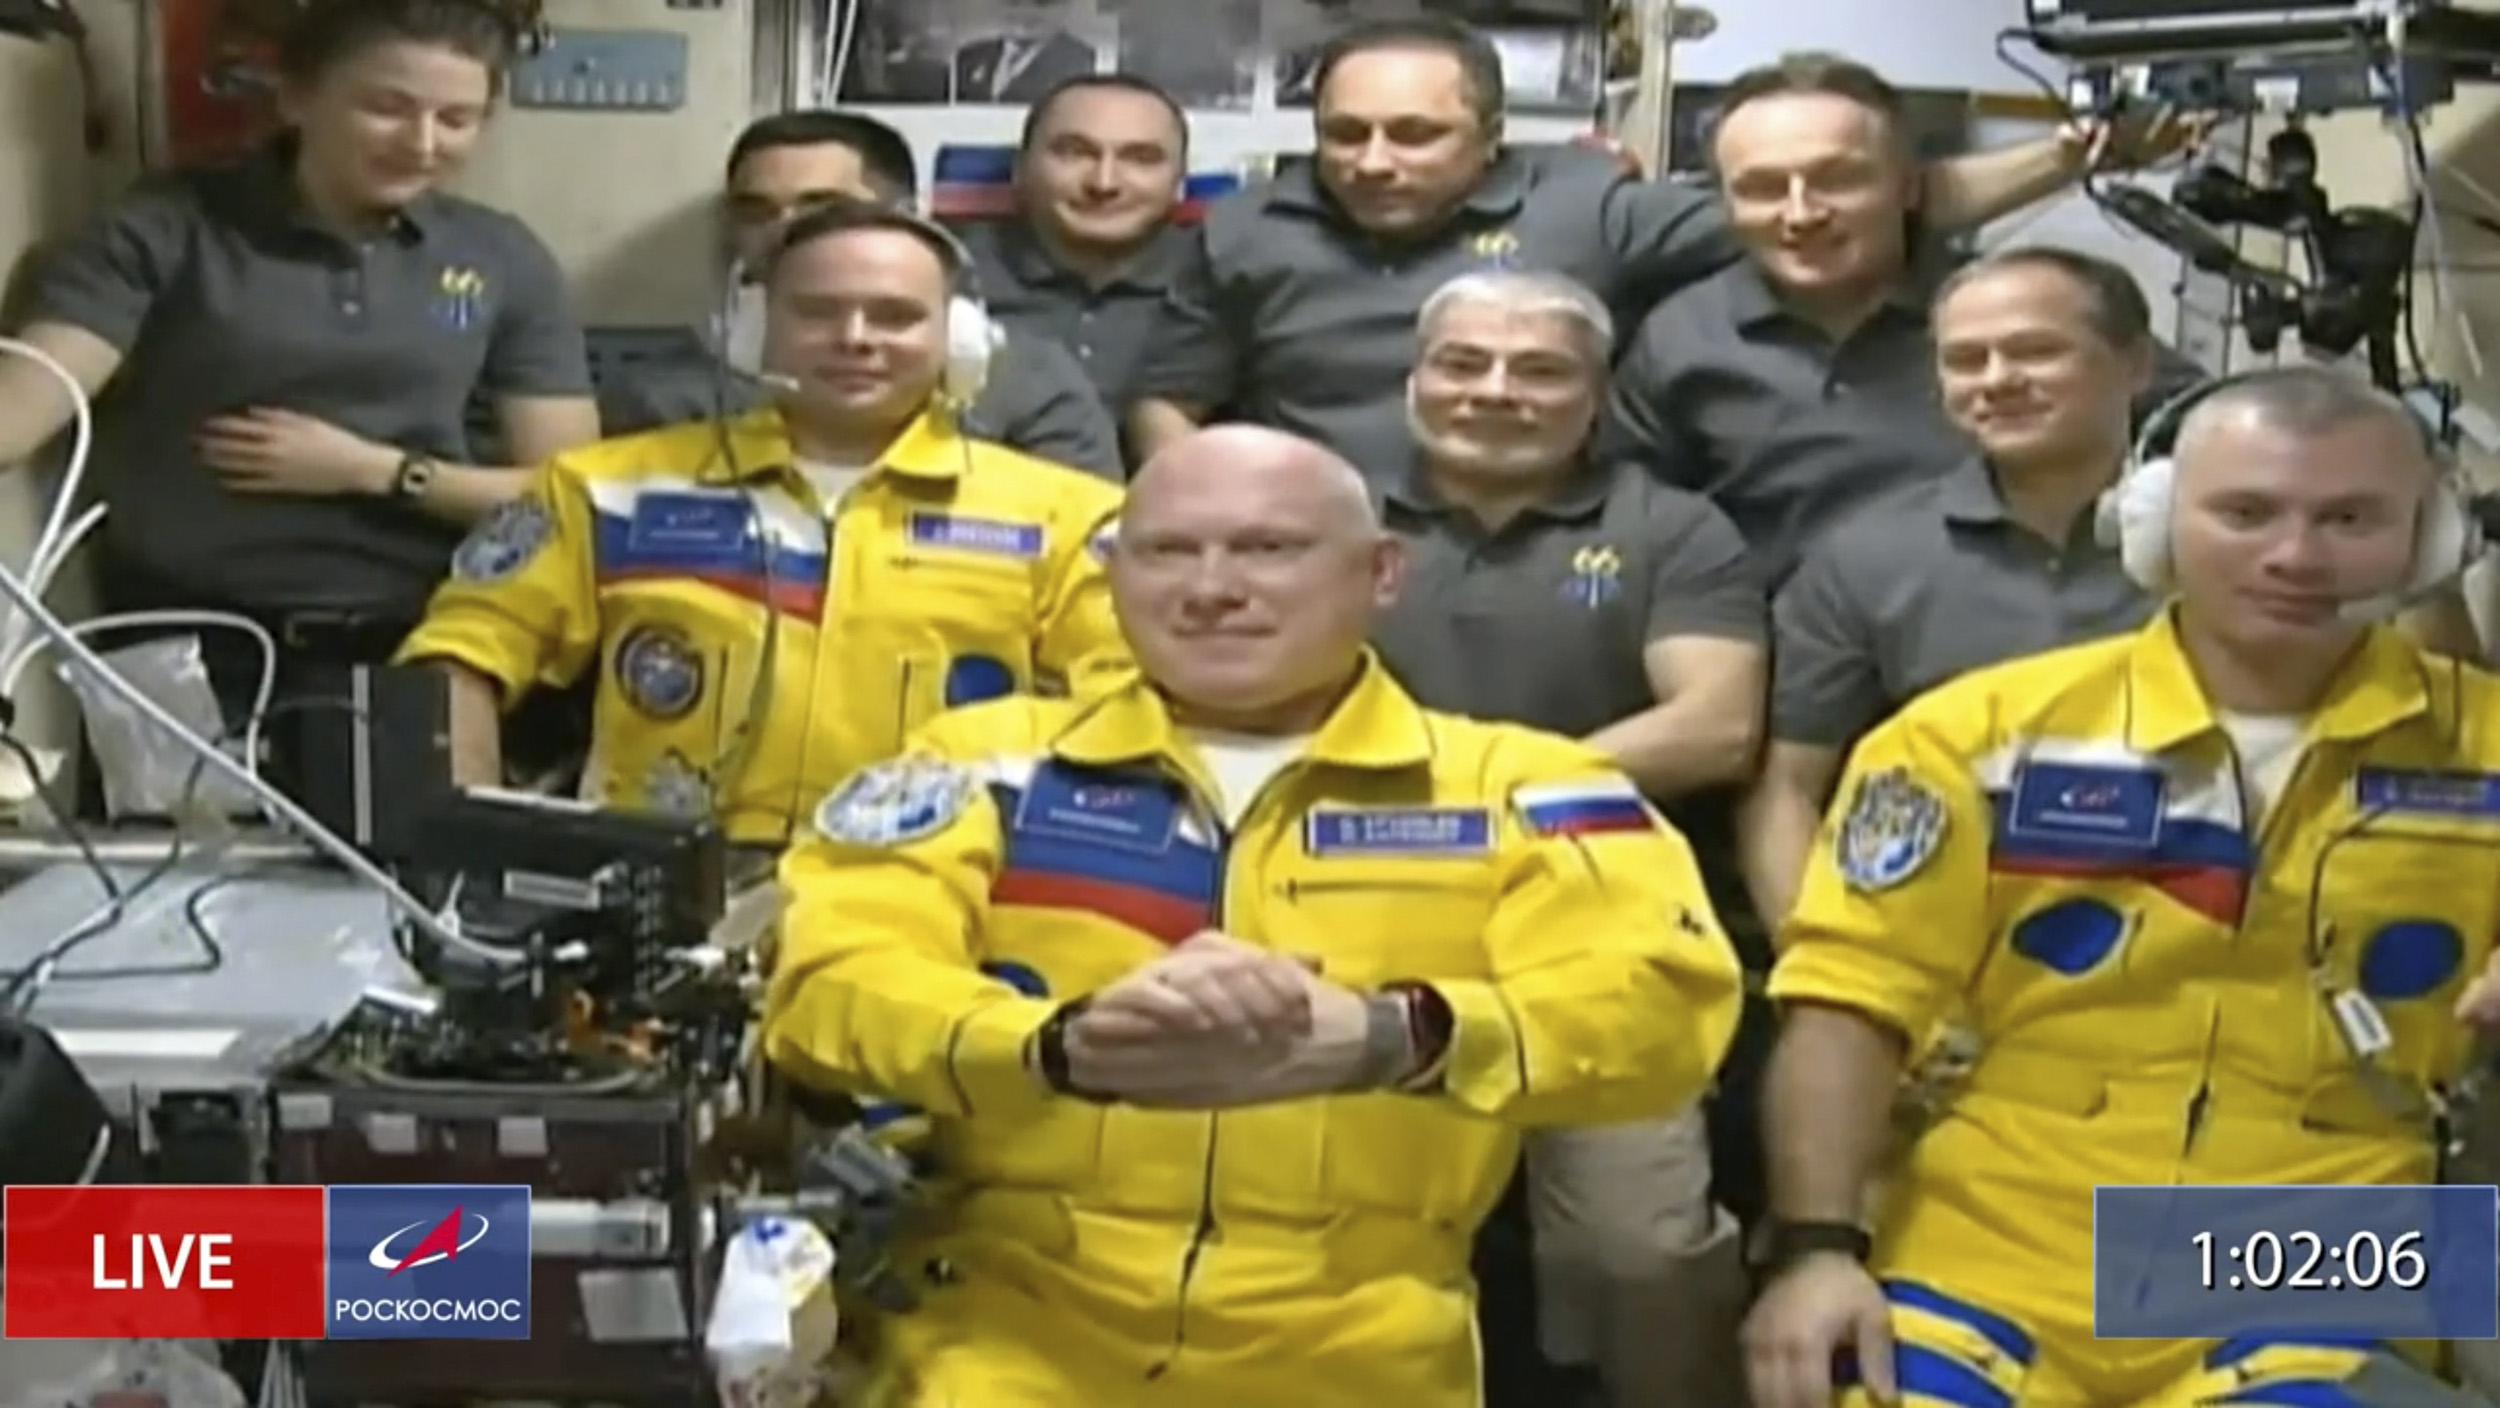 In this frame grab from video provided by Roscosmos, Russian cosmonauts Sergey Korsakov, Oleg Artemyev and Denis Matveyev are seen during a welcome ceremony after arriving at the International Space Station, on March 18, the first new faces in space since the start of Russia’s war in Ukraine. The crew emerged from the Soyuz capsule wearing yellow flight suits with blue stripes, the colors of the Ukrainian flag.